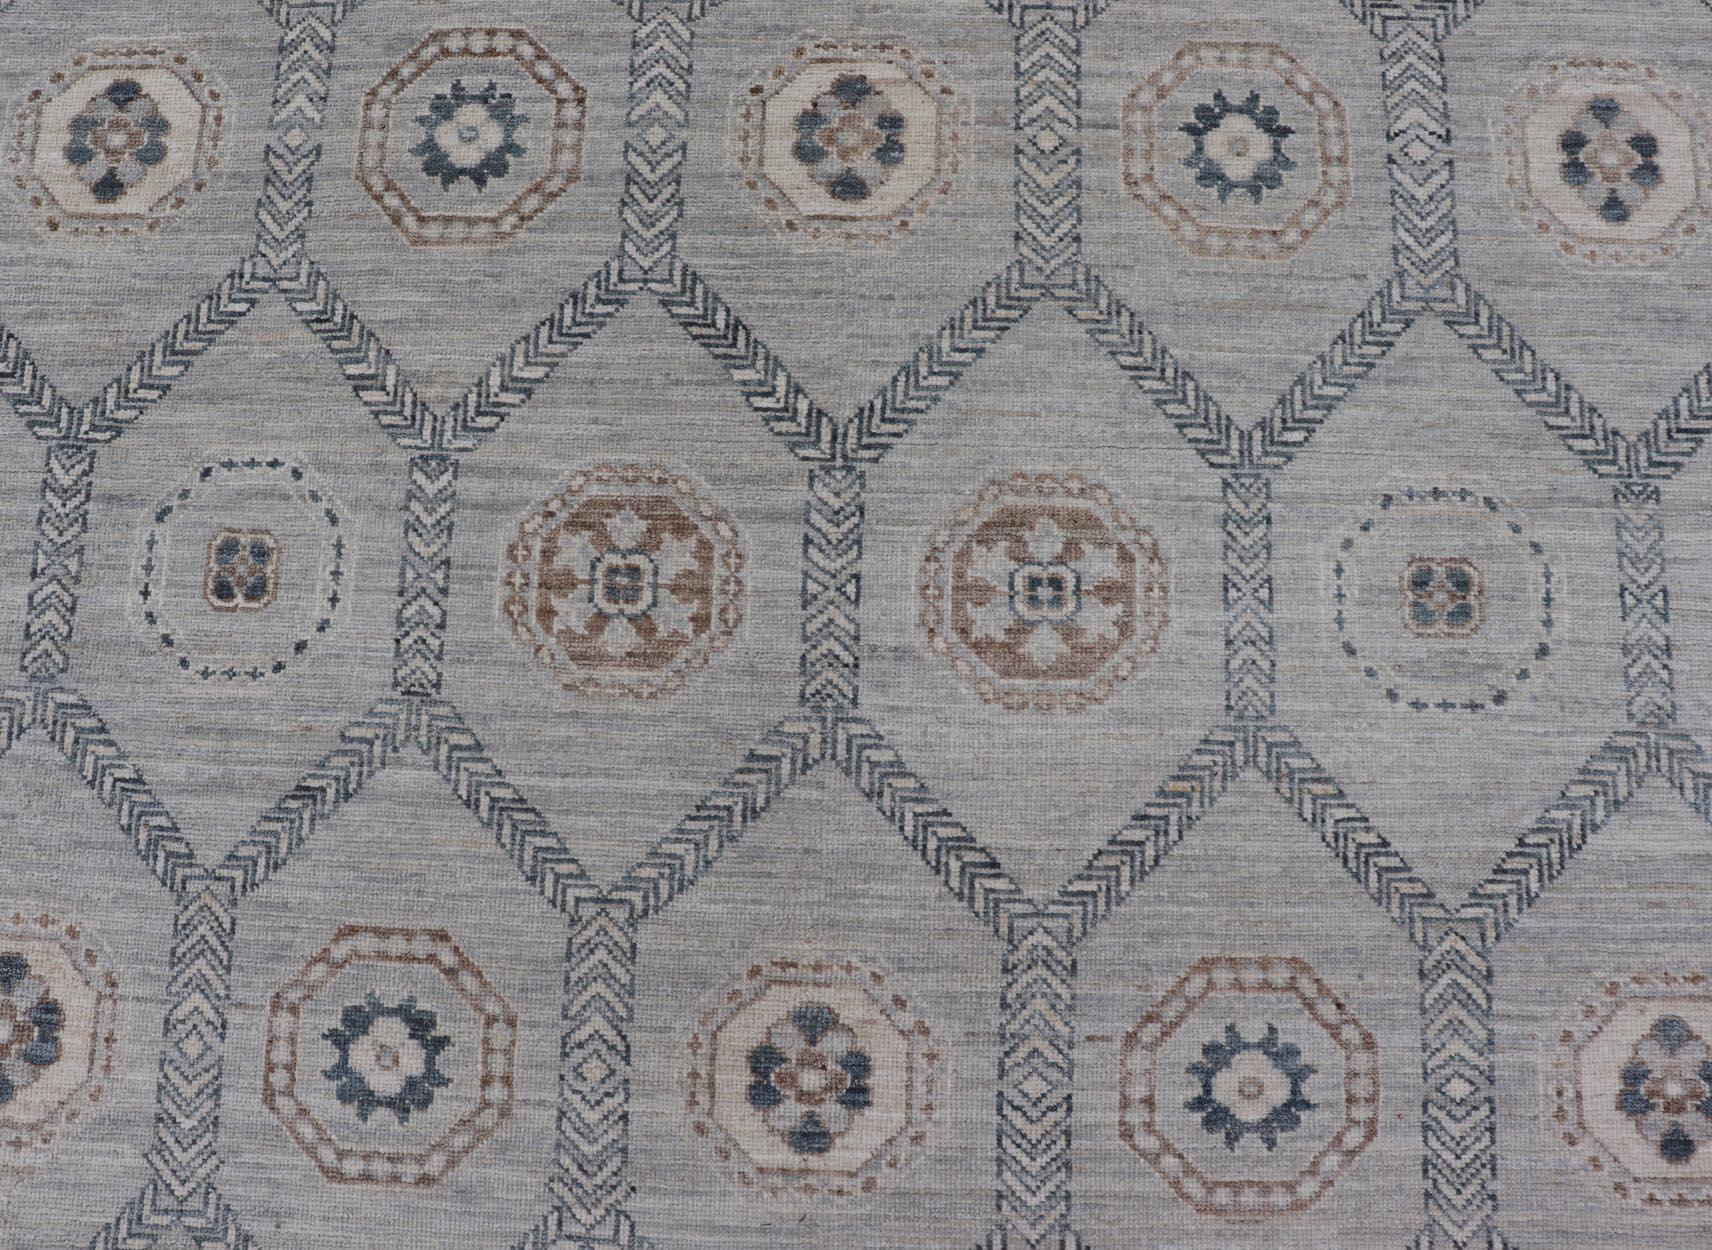 Wool Afghan Sub-Geometric Mosaic Khotan Rug with Muted Tones of Blue and Brown For Sale